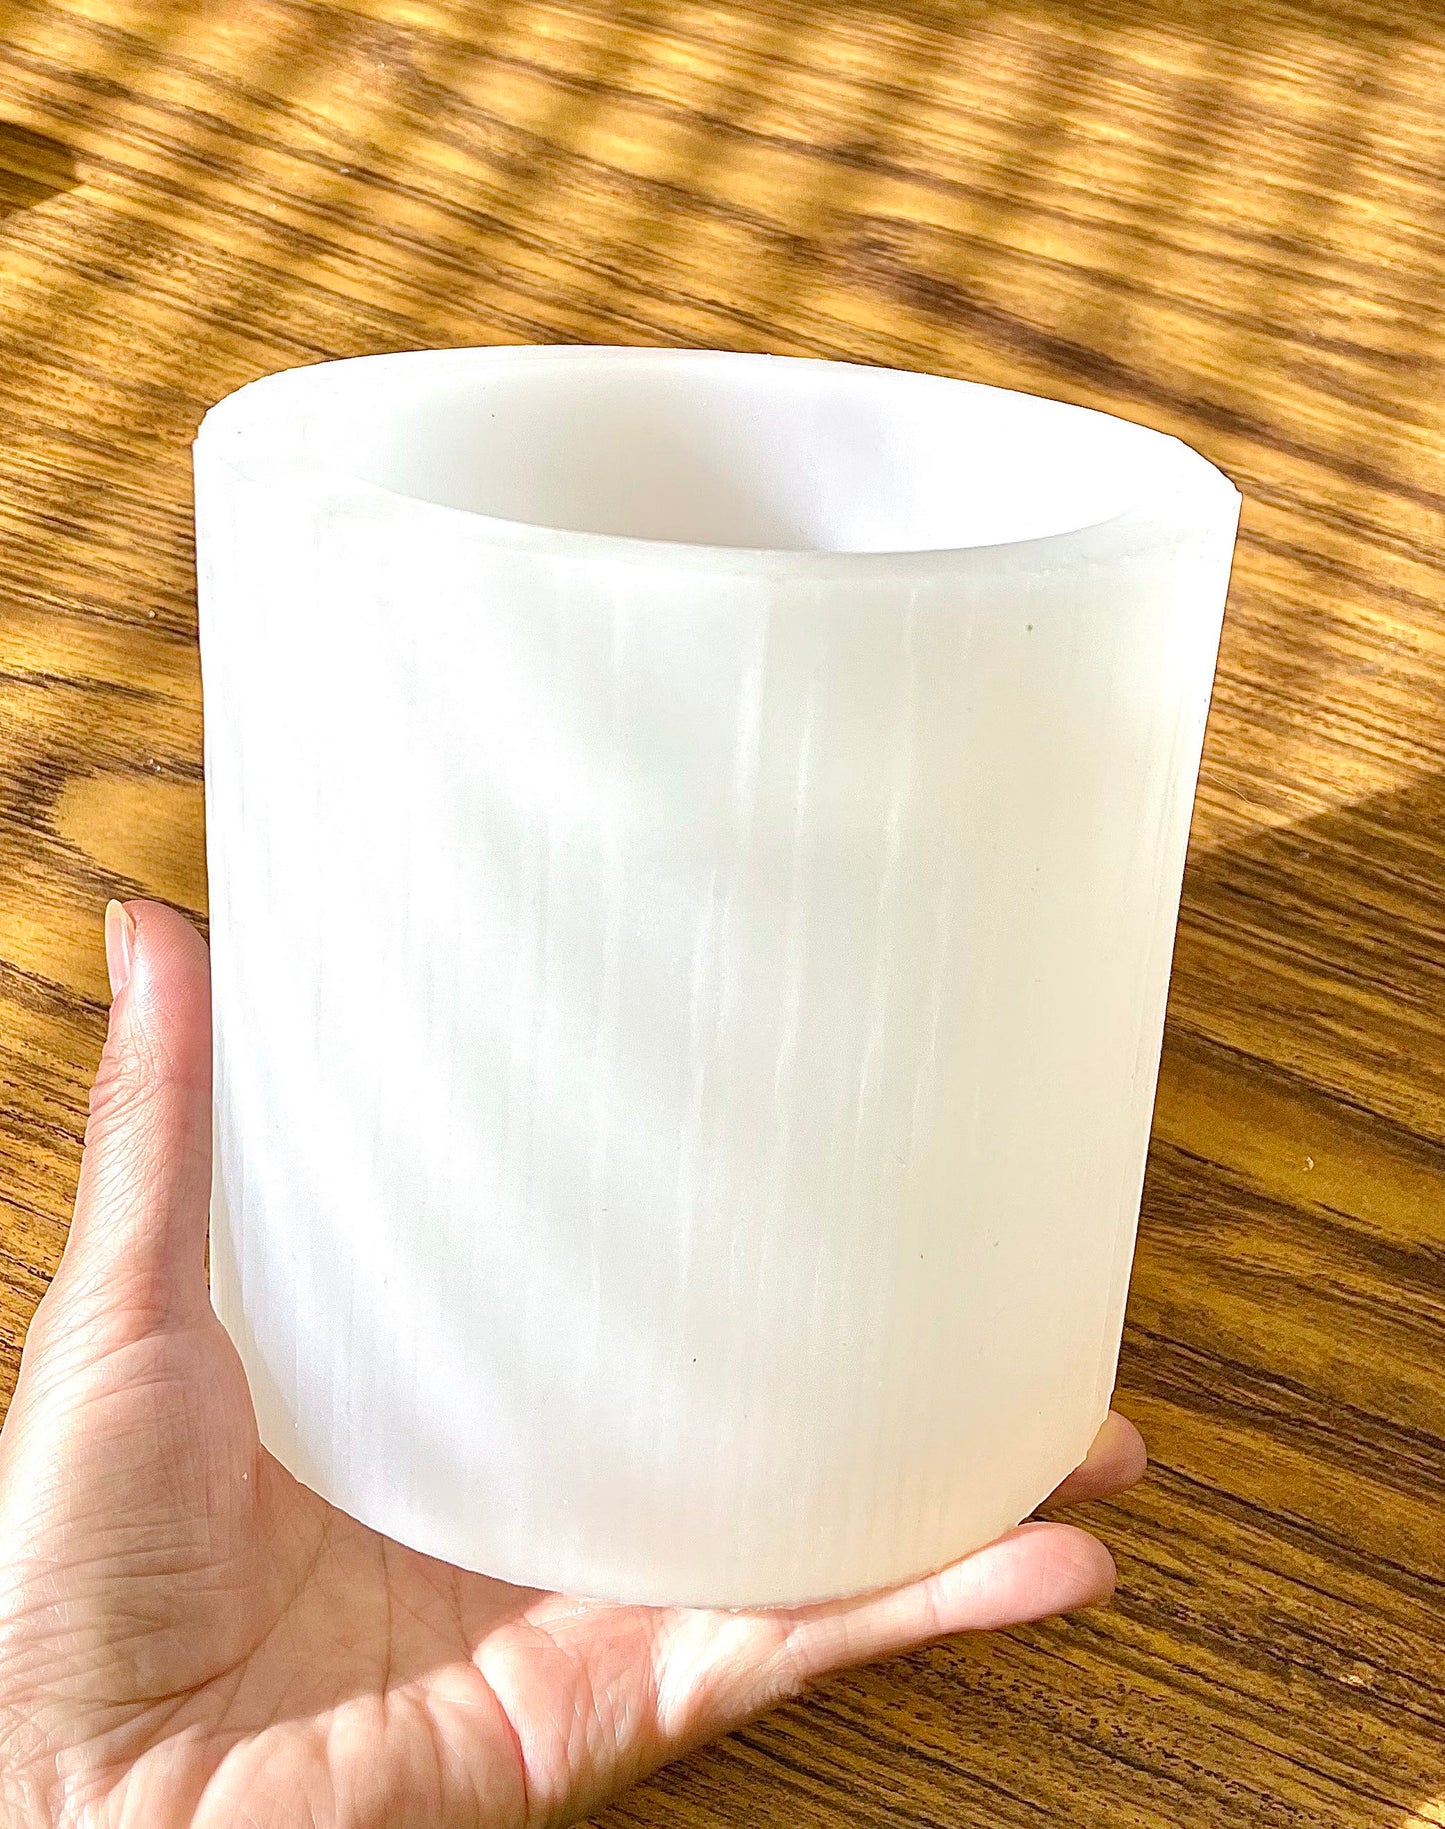 Big silicone pillar candle mold - round cylinder mold - soap resin mold - homemade - 4” x 4.5”